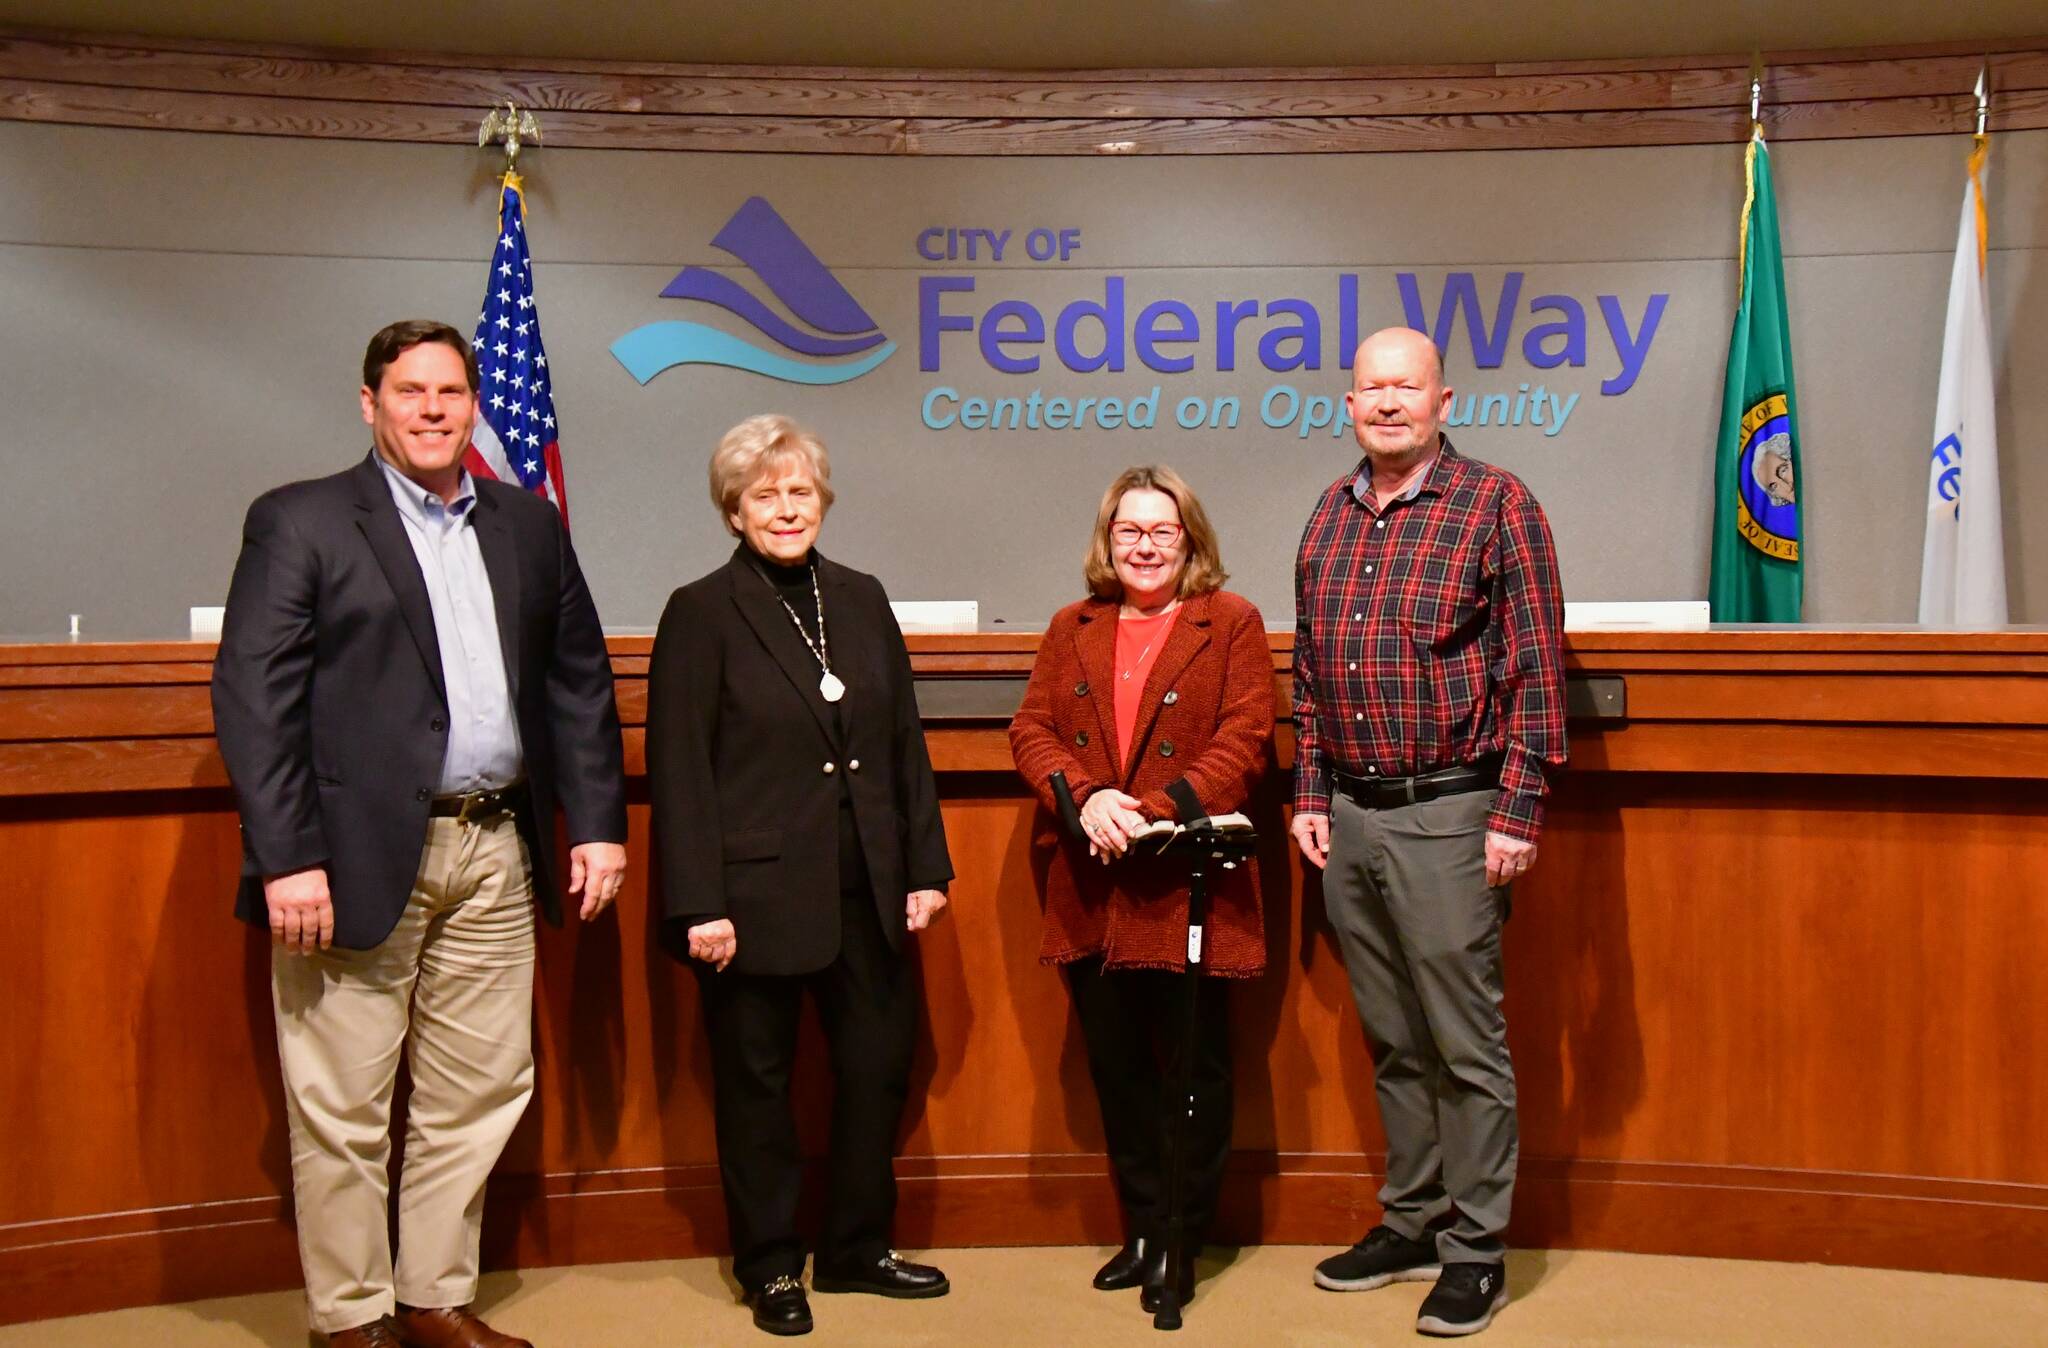 hoto by Bruce Honda
Mayor Jim Ferrell poses with Linda Kochmar, Susan Honda and Jack Walsh, who were all re-elected to their previous positions on the Federal Way City Council in November 2023. P